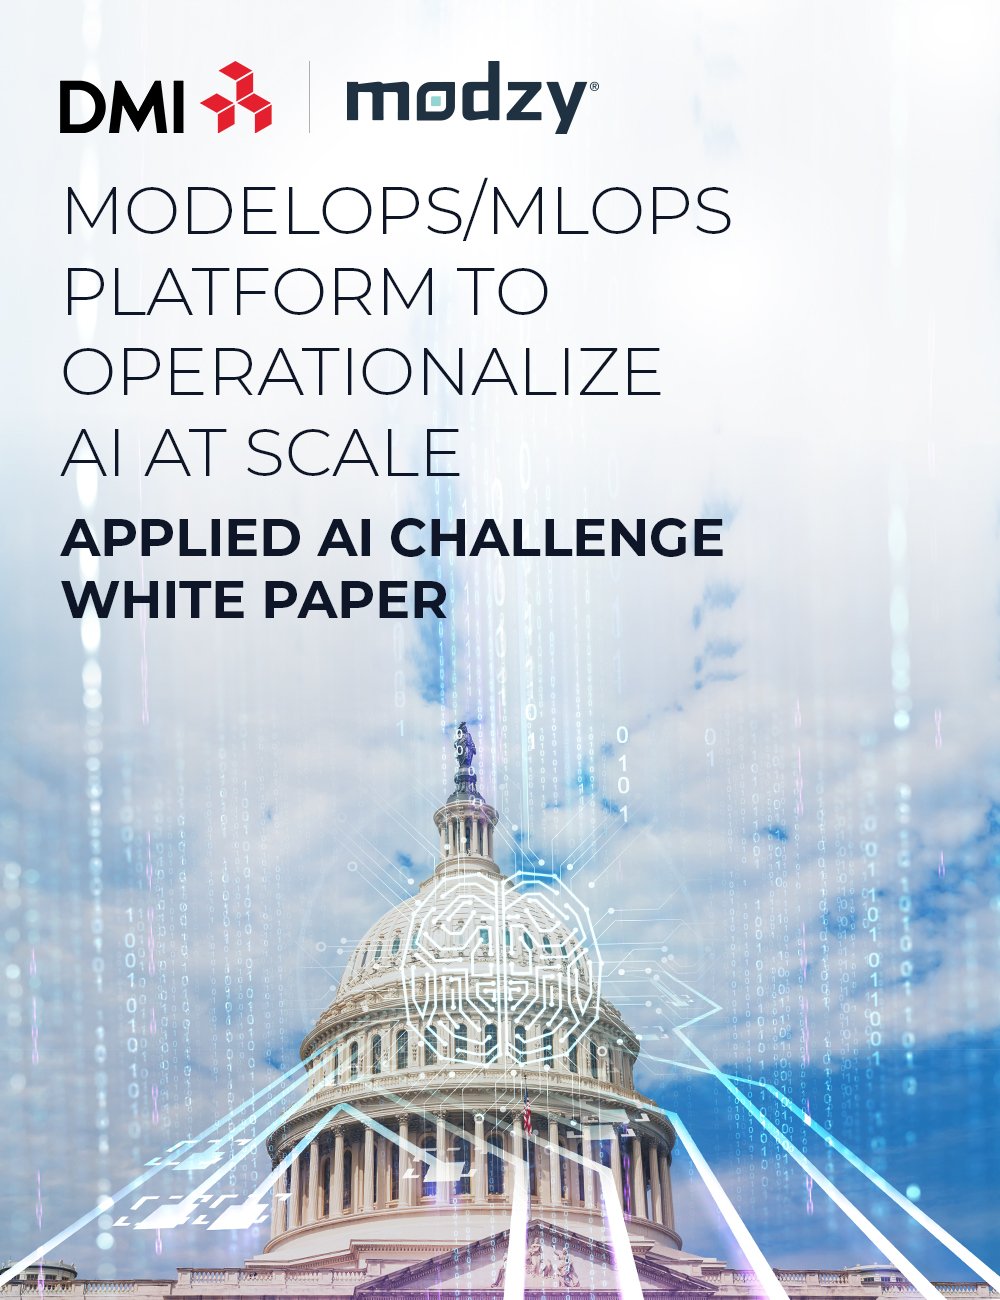 MODELOPS/MLOPS PLATFORM TO OPERATIONALIZE AI AT SCALE